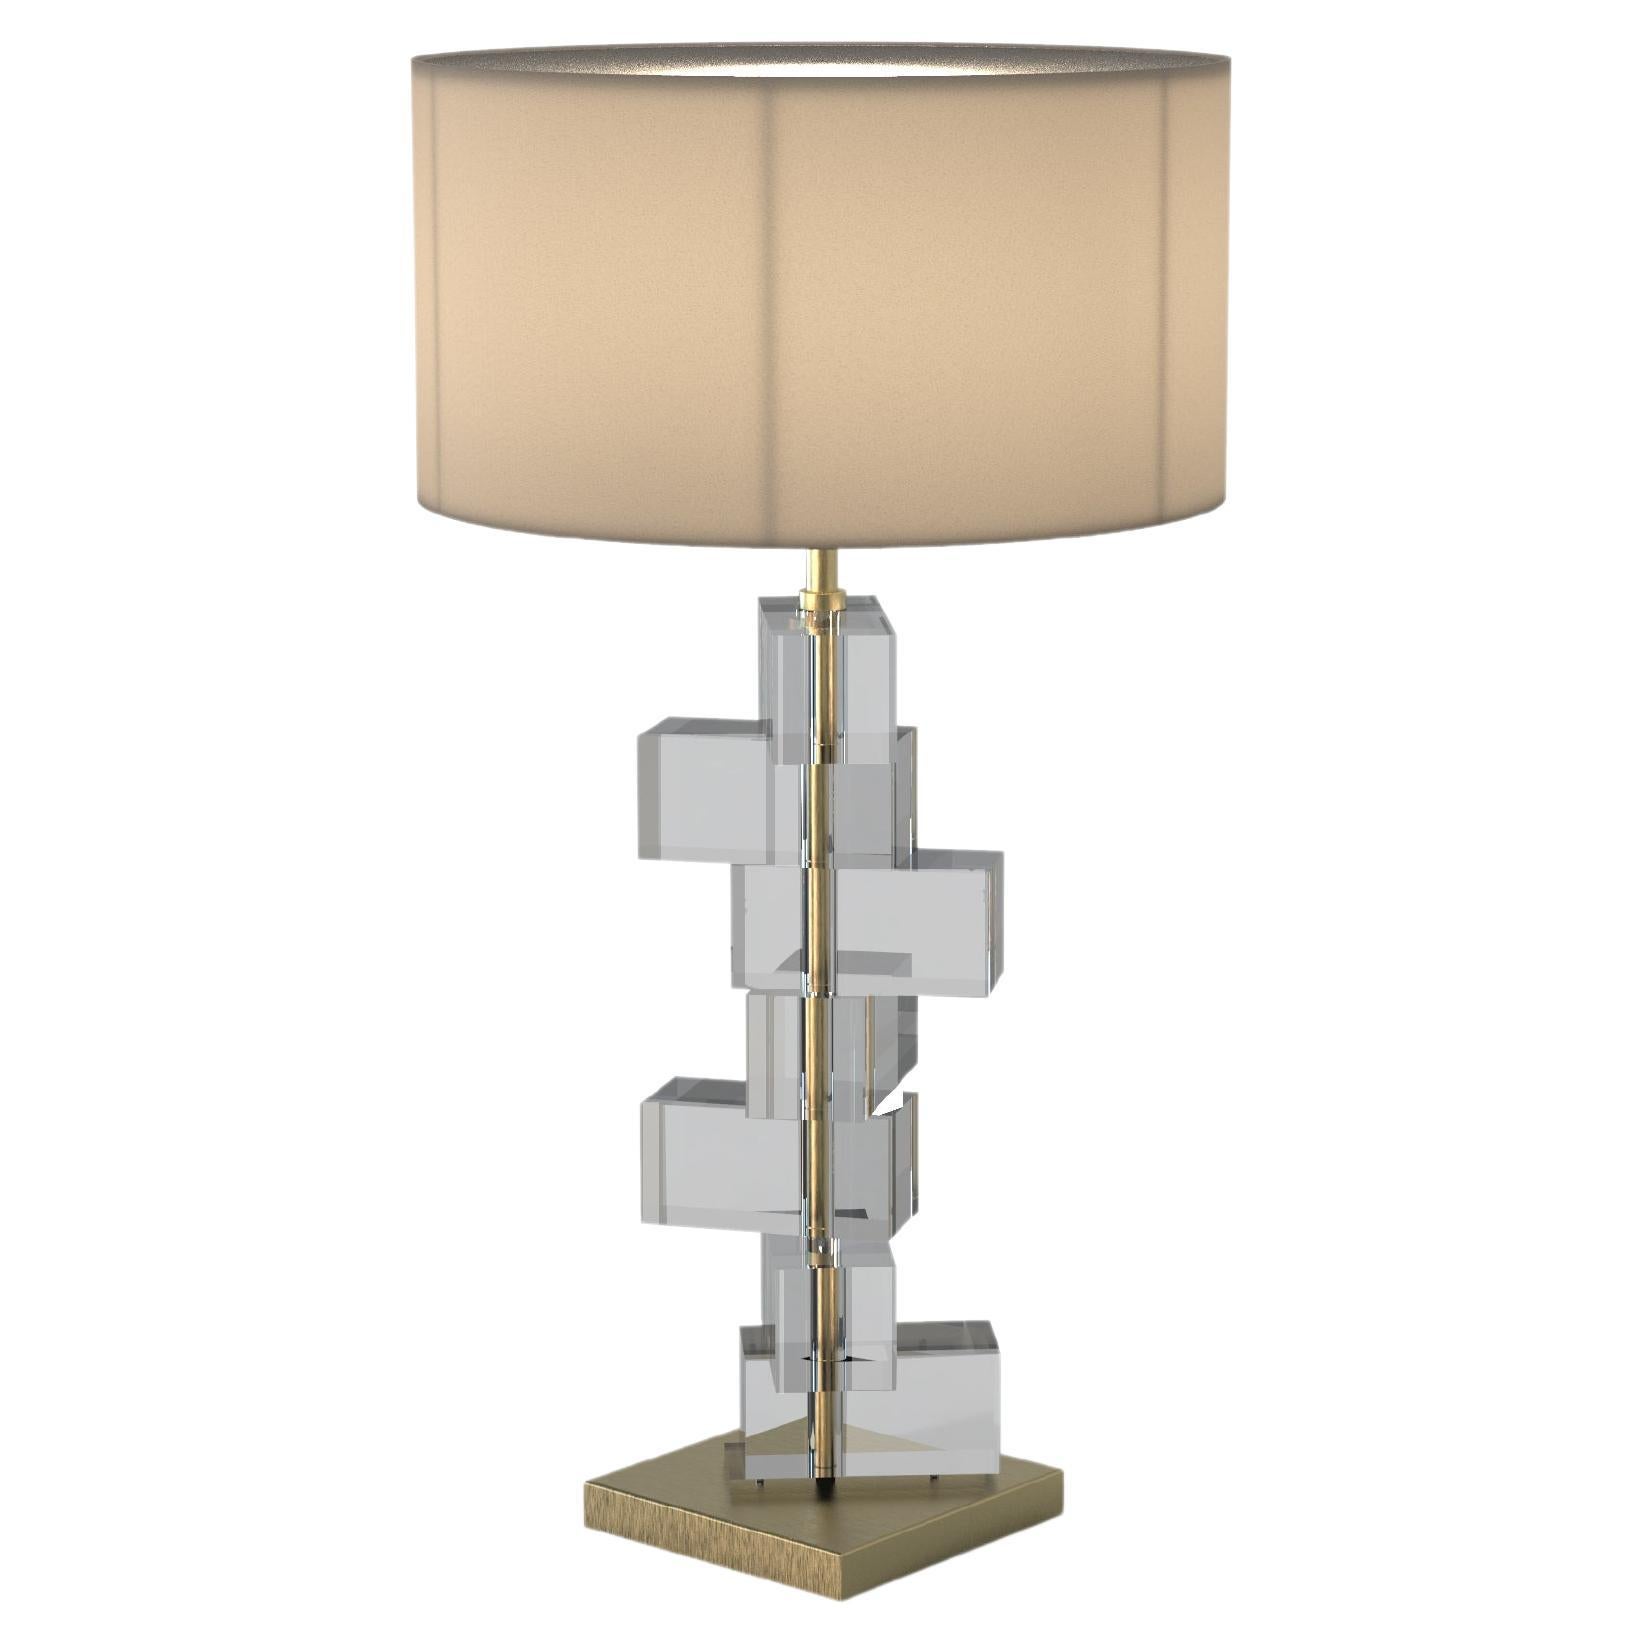 OP1 Table Lamp Exclusive Handmade in Italy